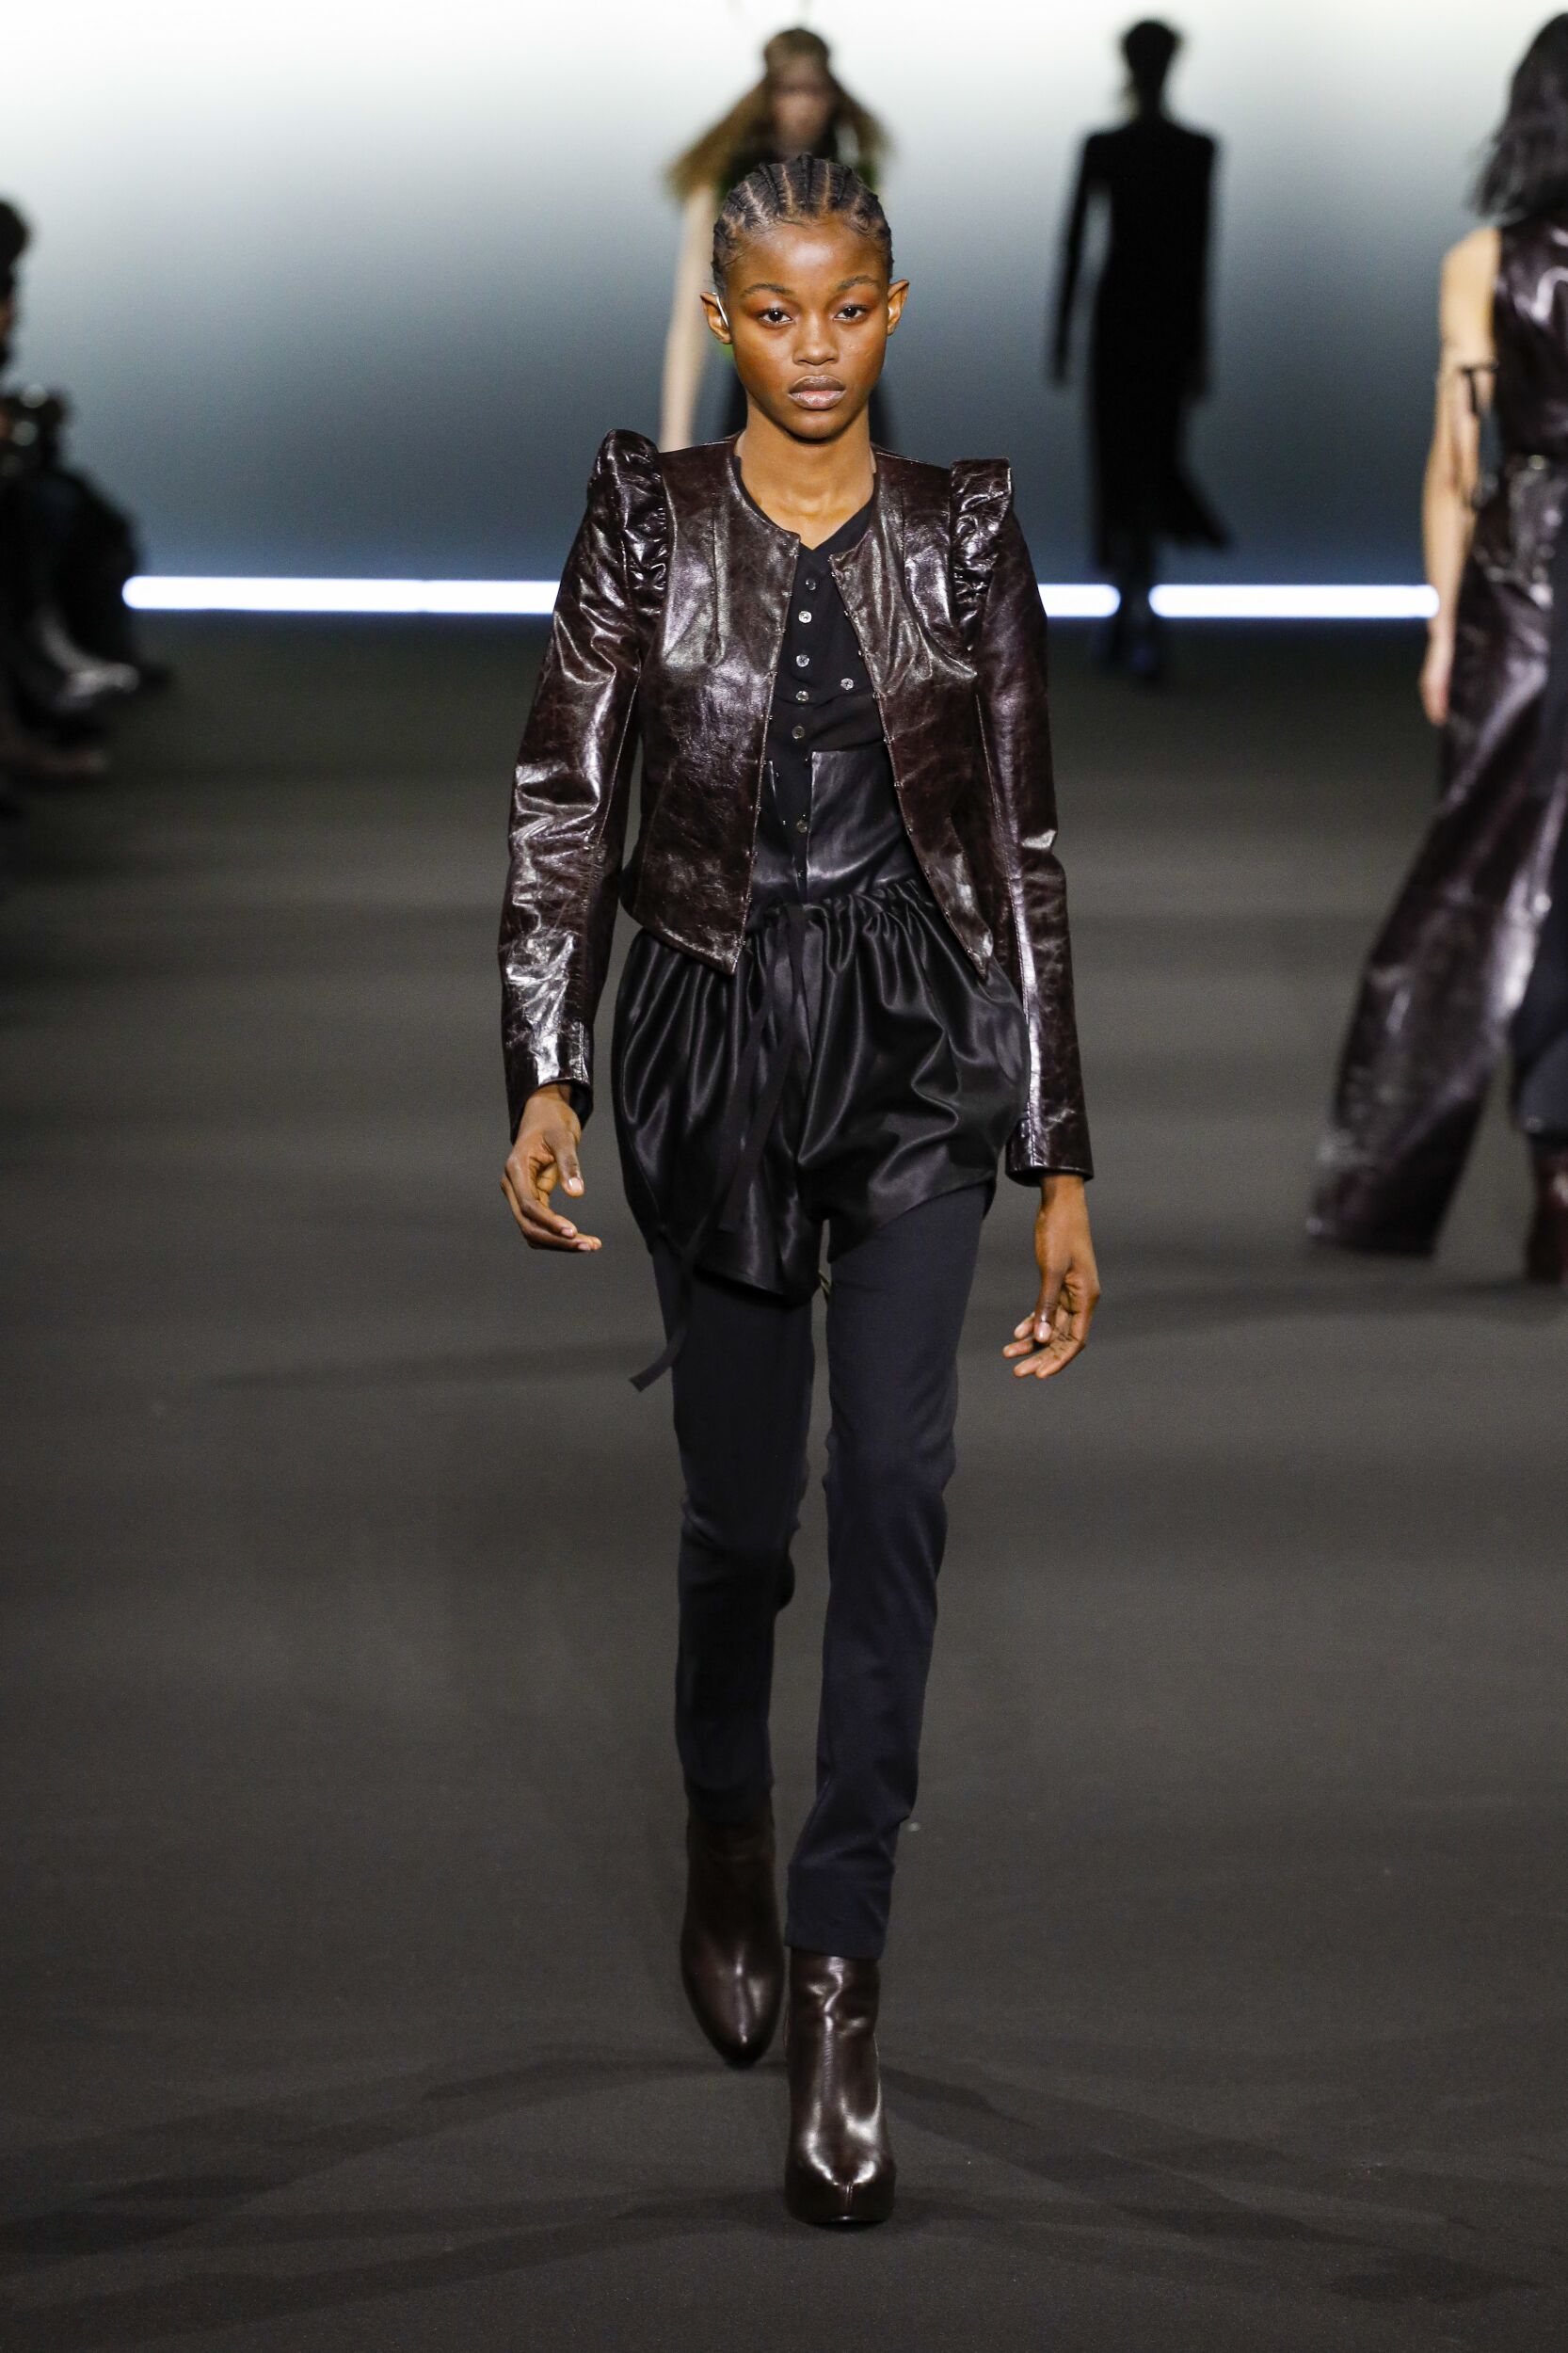 ANN DEMEULEMEESTER FALL WINTER 2020 WOMEN’S COLLECTION | The Skinny Beep